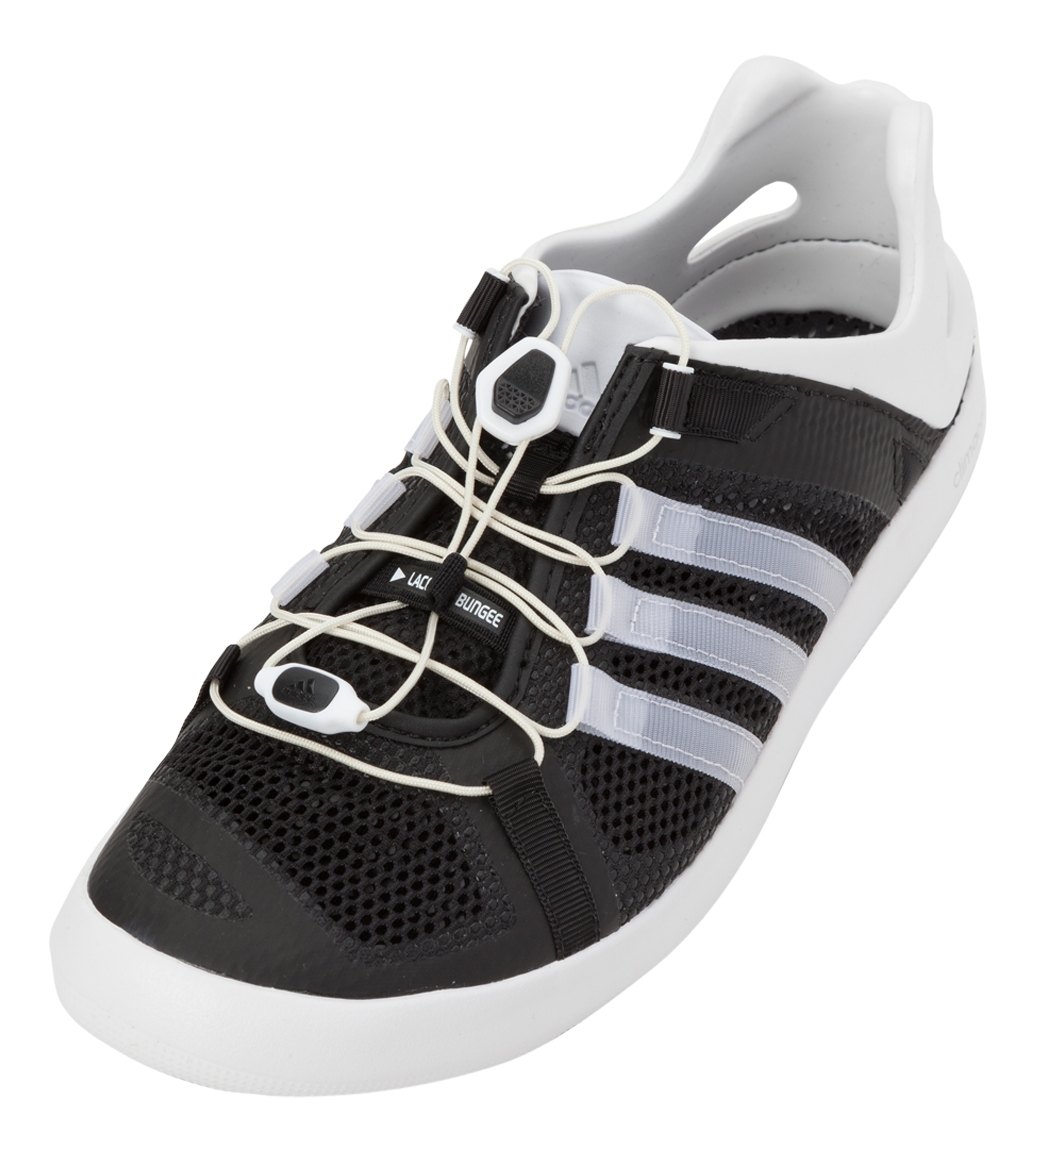 adidas climacool boat breeze water shoes